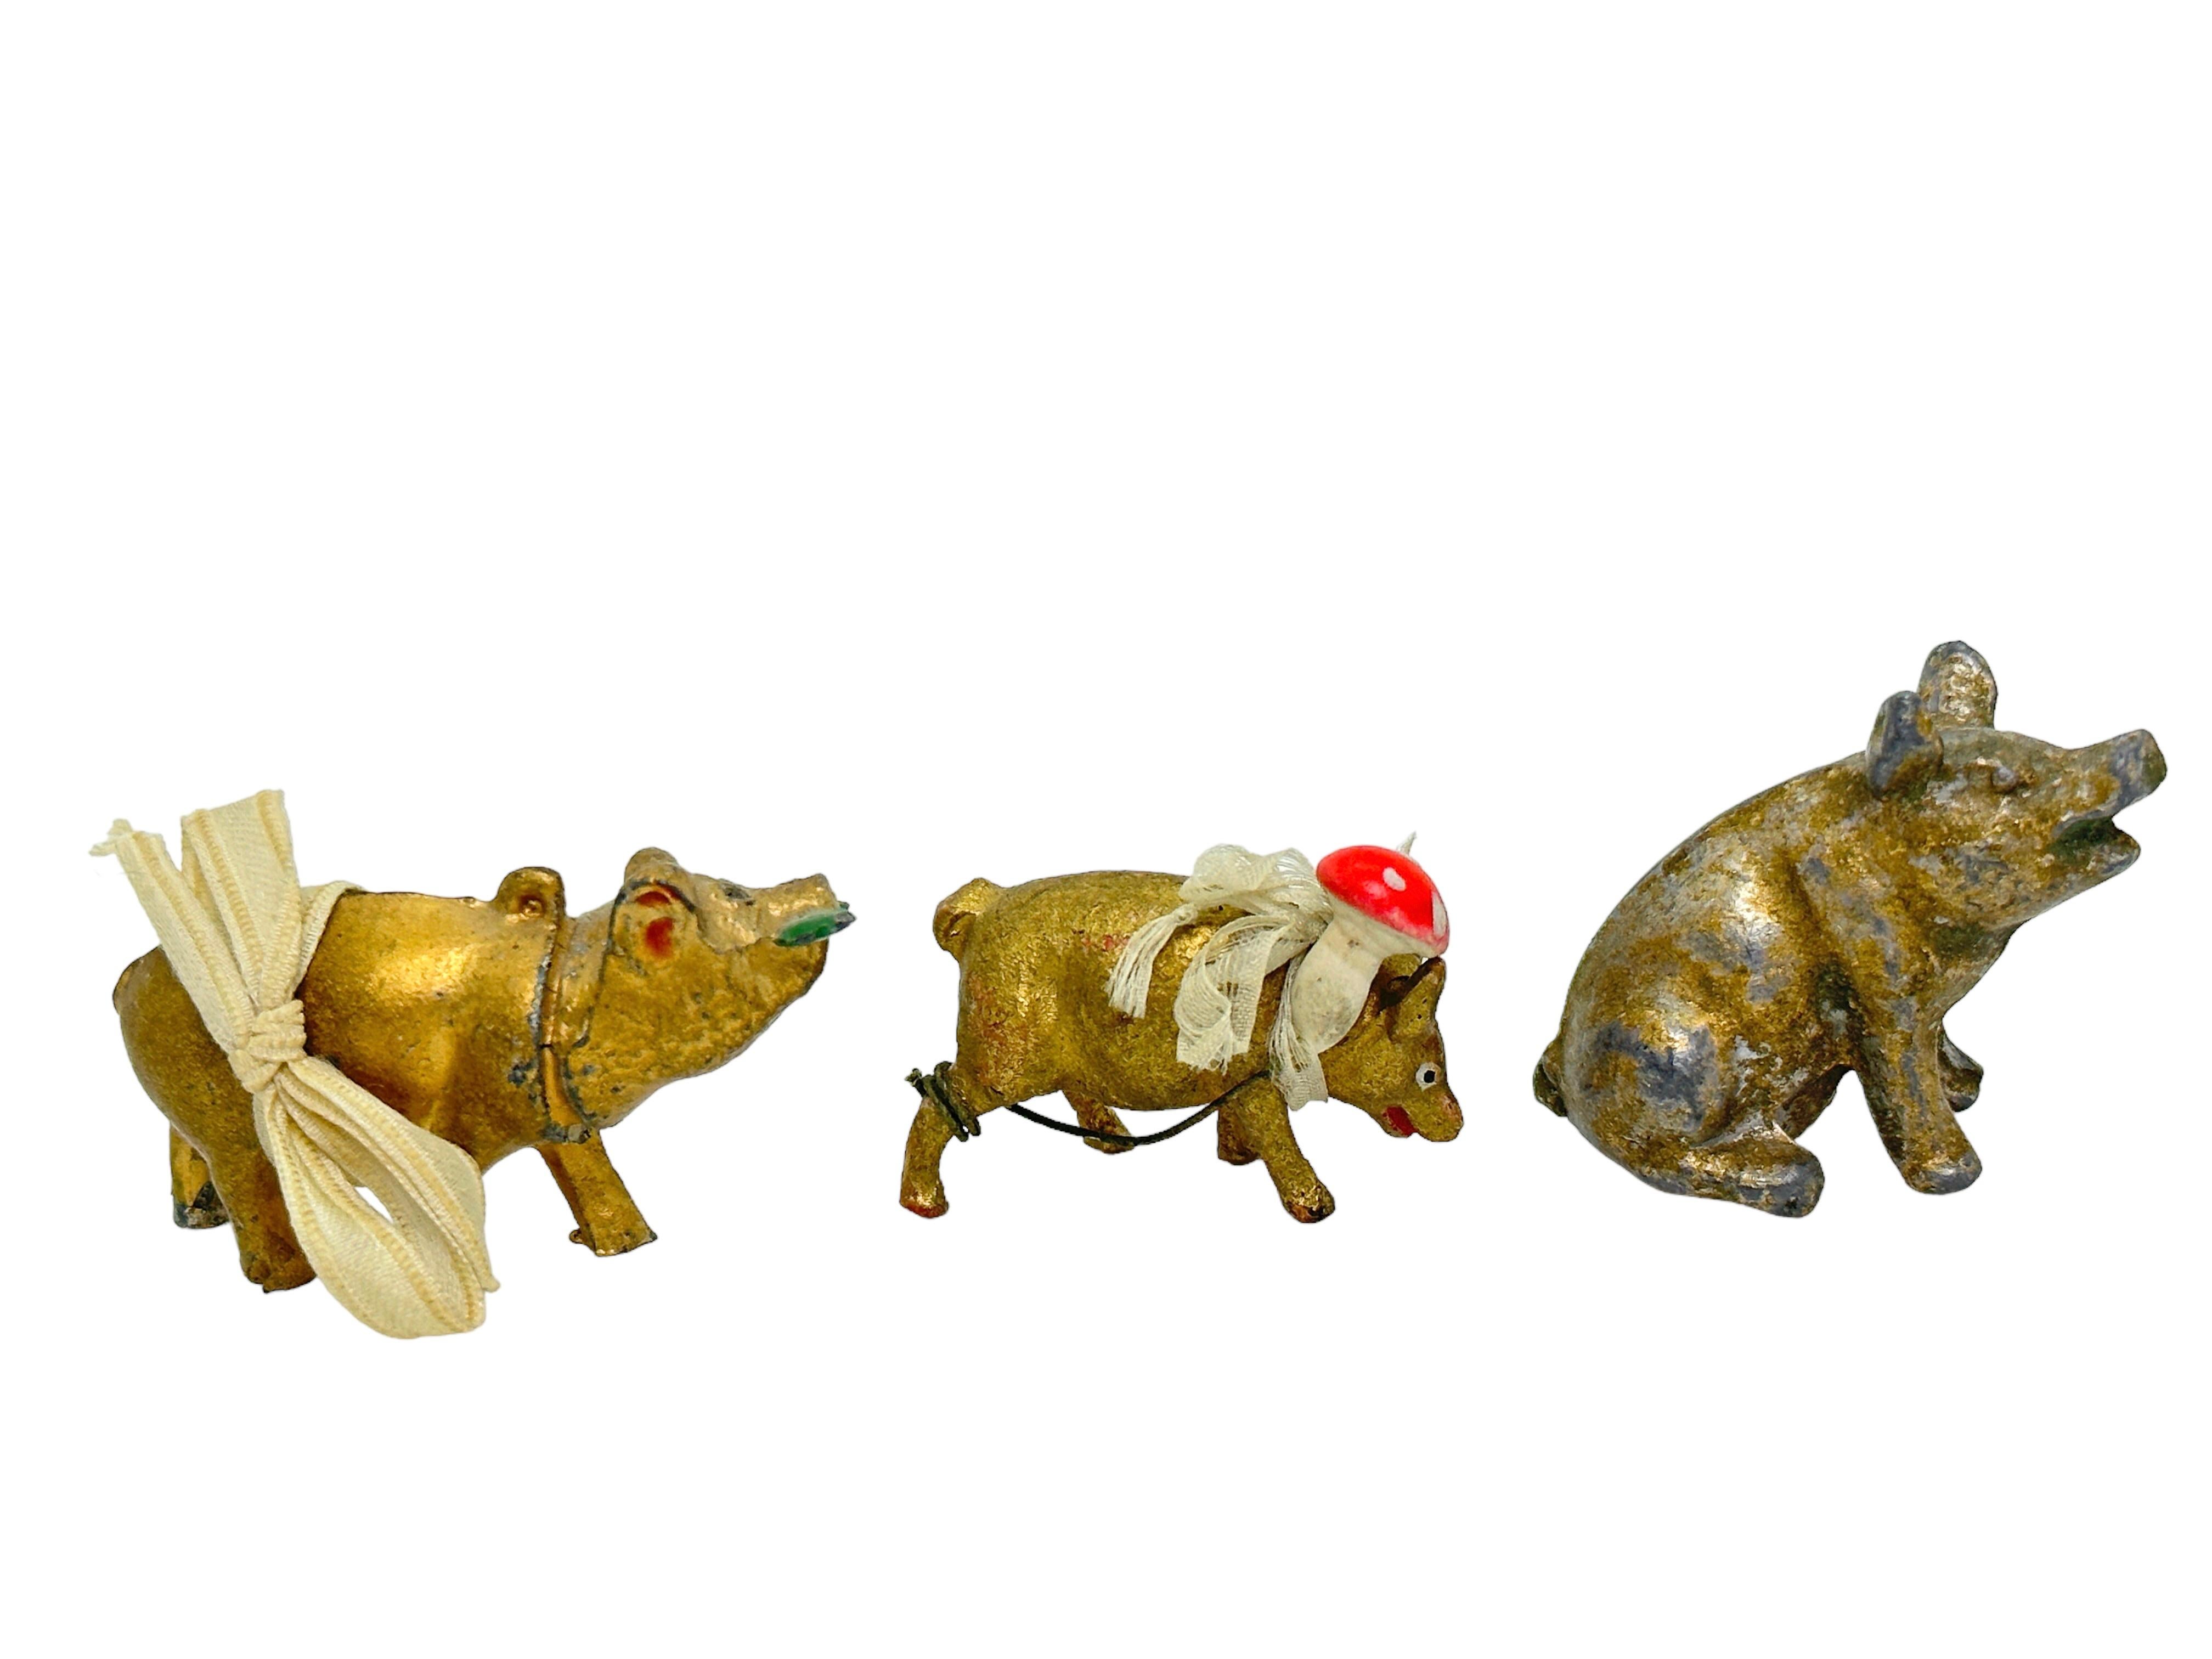 Austrian Collection of Pig & Chimney Sweep Lucky Charm Figurines, Antique Austria, 1900s